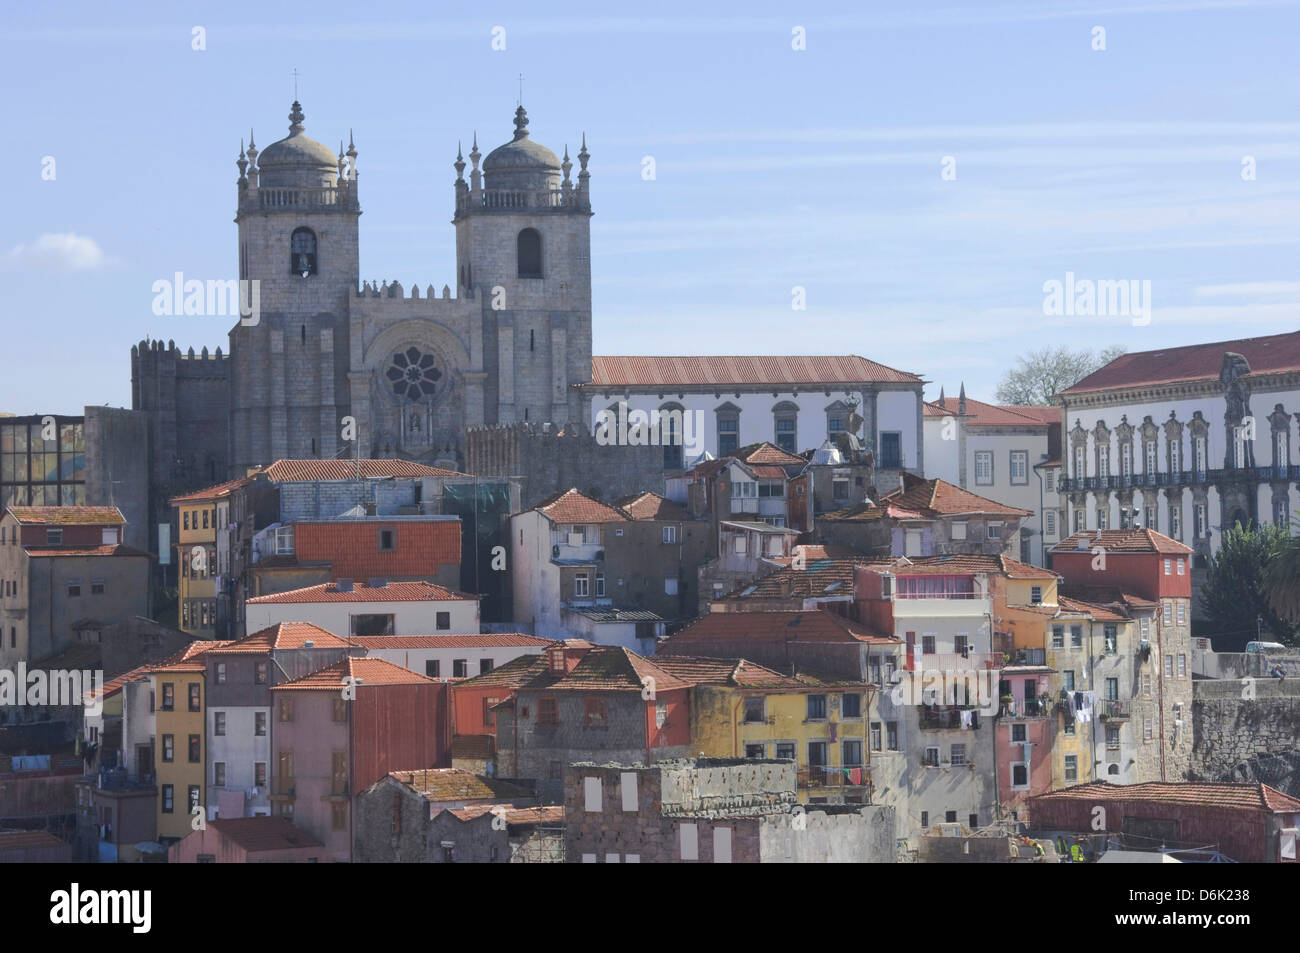 The Cathedral (Terreiro da Se) overlooks a part of old Oporto, Portugal, Europe Stock Photo